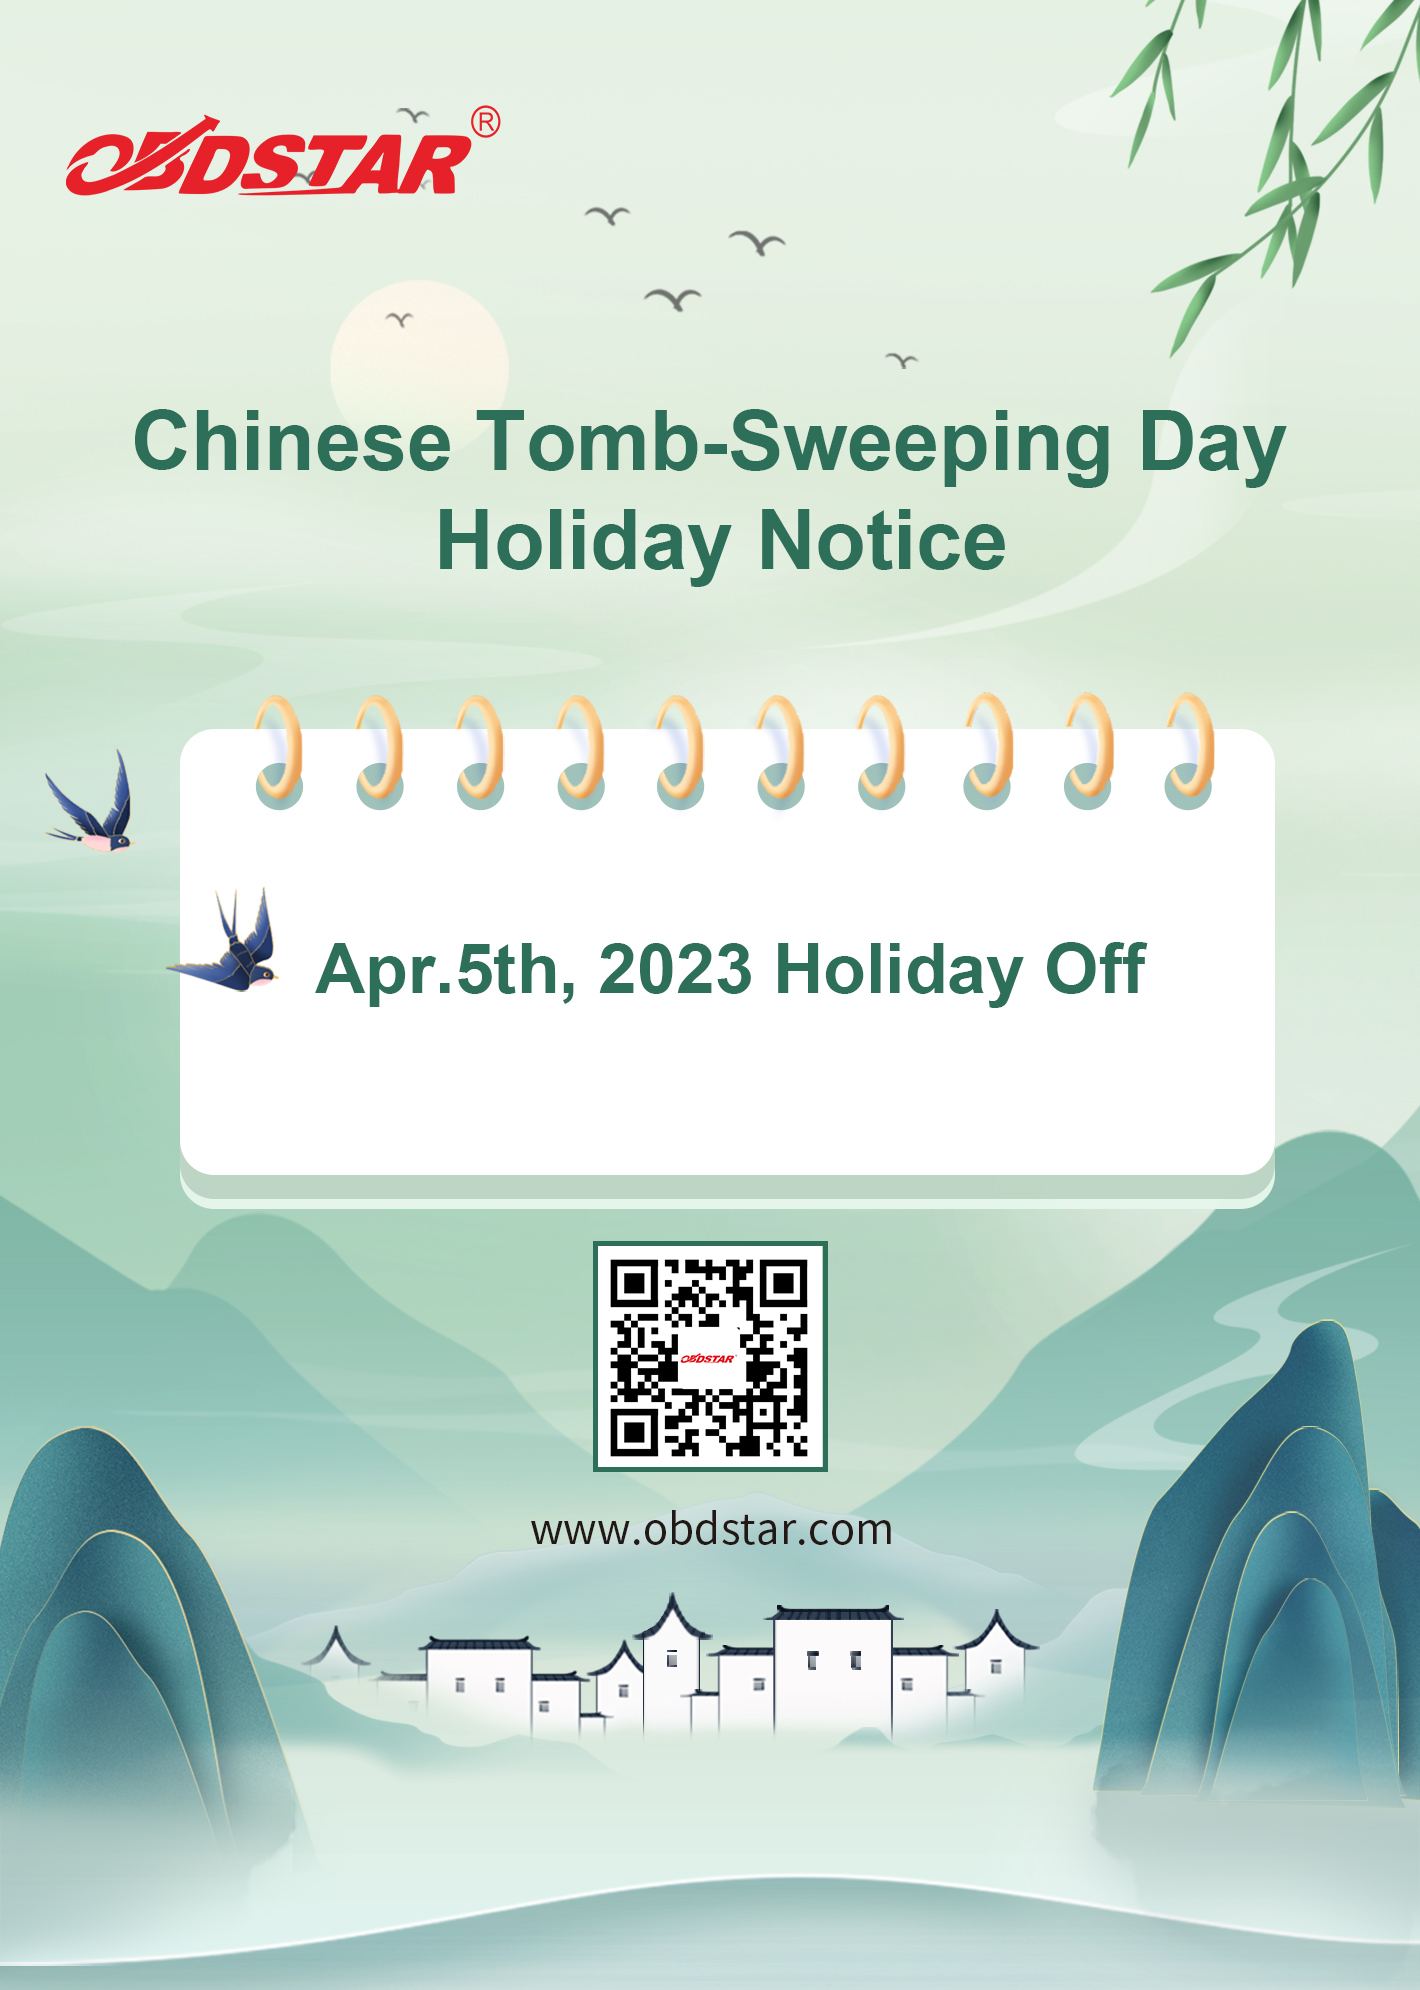 2023 Chinese Tomb-Sweeping Day Holiday Notice